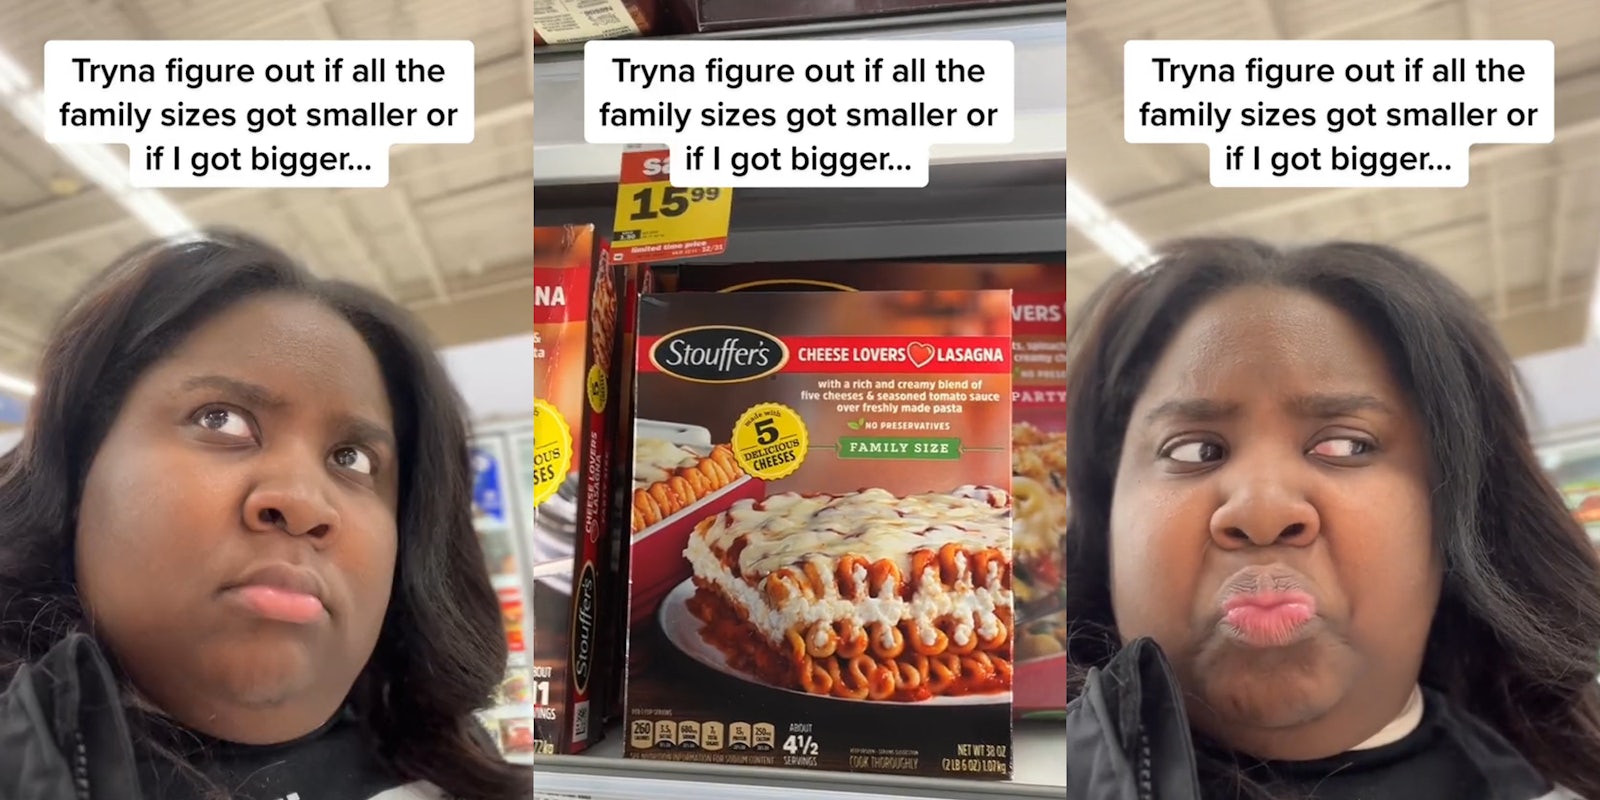 woman in store with caption 'Tryna figure out if all the family sizes got smaller or if I got bigger...' (l) Stouffer's Cheese Lover's Lasagna Family Size in freezer at store with caption 'Tryna figure out if all the family sizes got smaller or if I got bigger...' (c) woman in store with caption 'Tryna figure out if all the family sizes got smaller or if I got bigger...' (r)